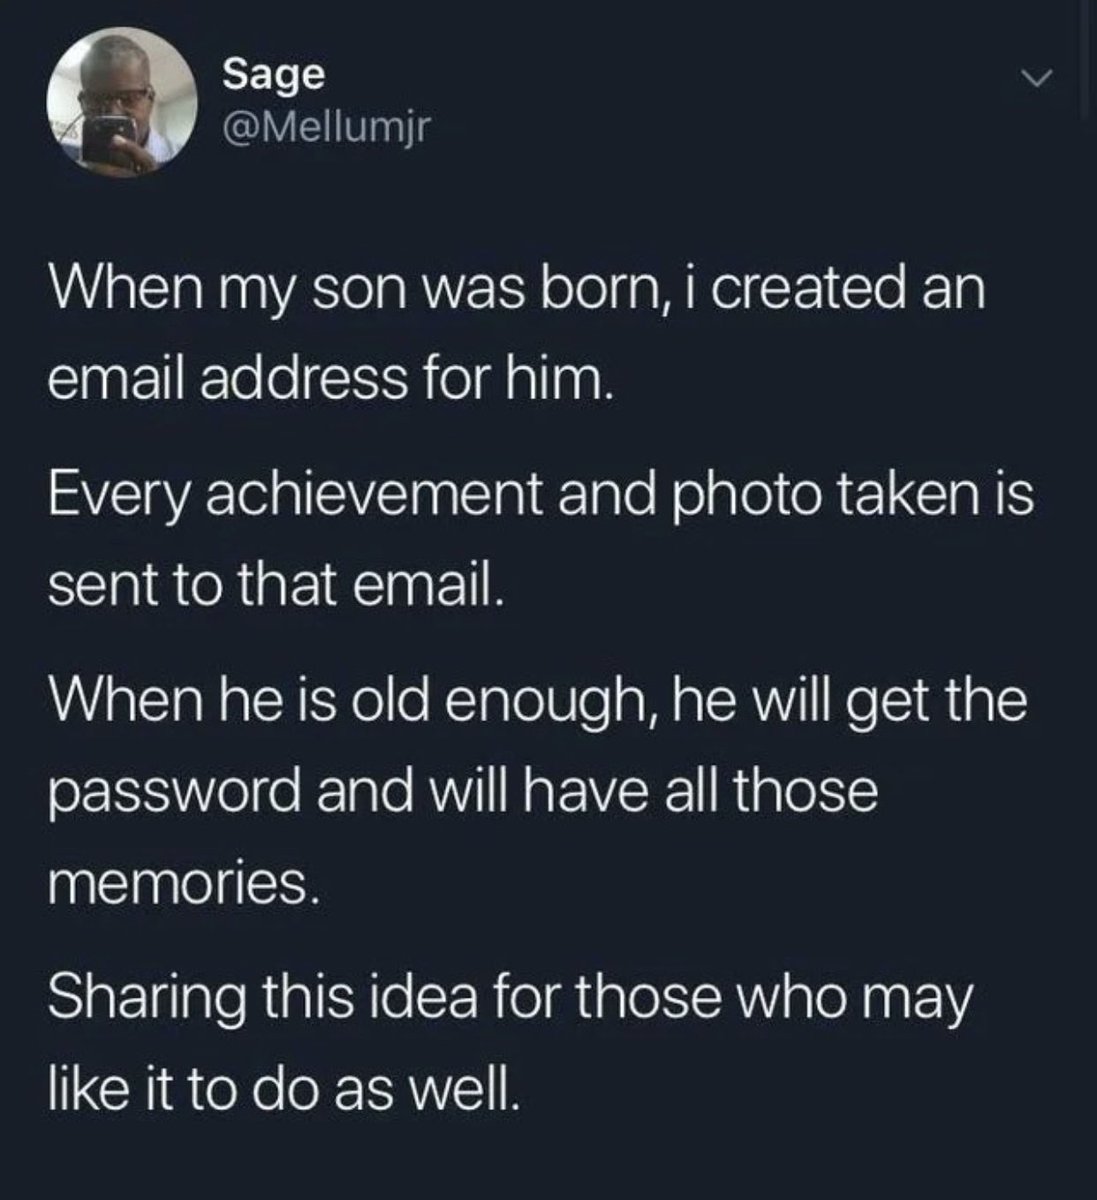 dudes posting their w's - instagram realest quotes ever - Sage When my son was born, i created an email address for him. Every achievement and photo taken is sent to that email. When he is old enough, he will get the password and will have all those memor